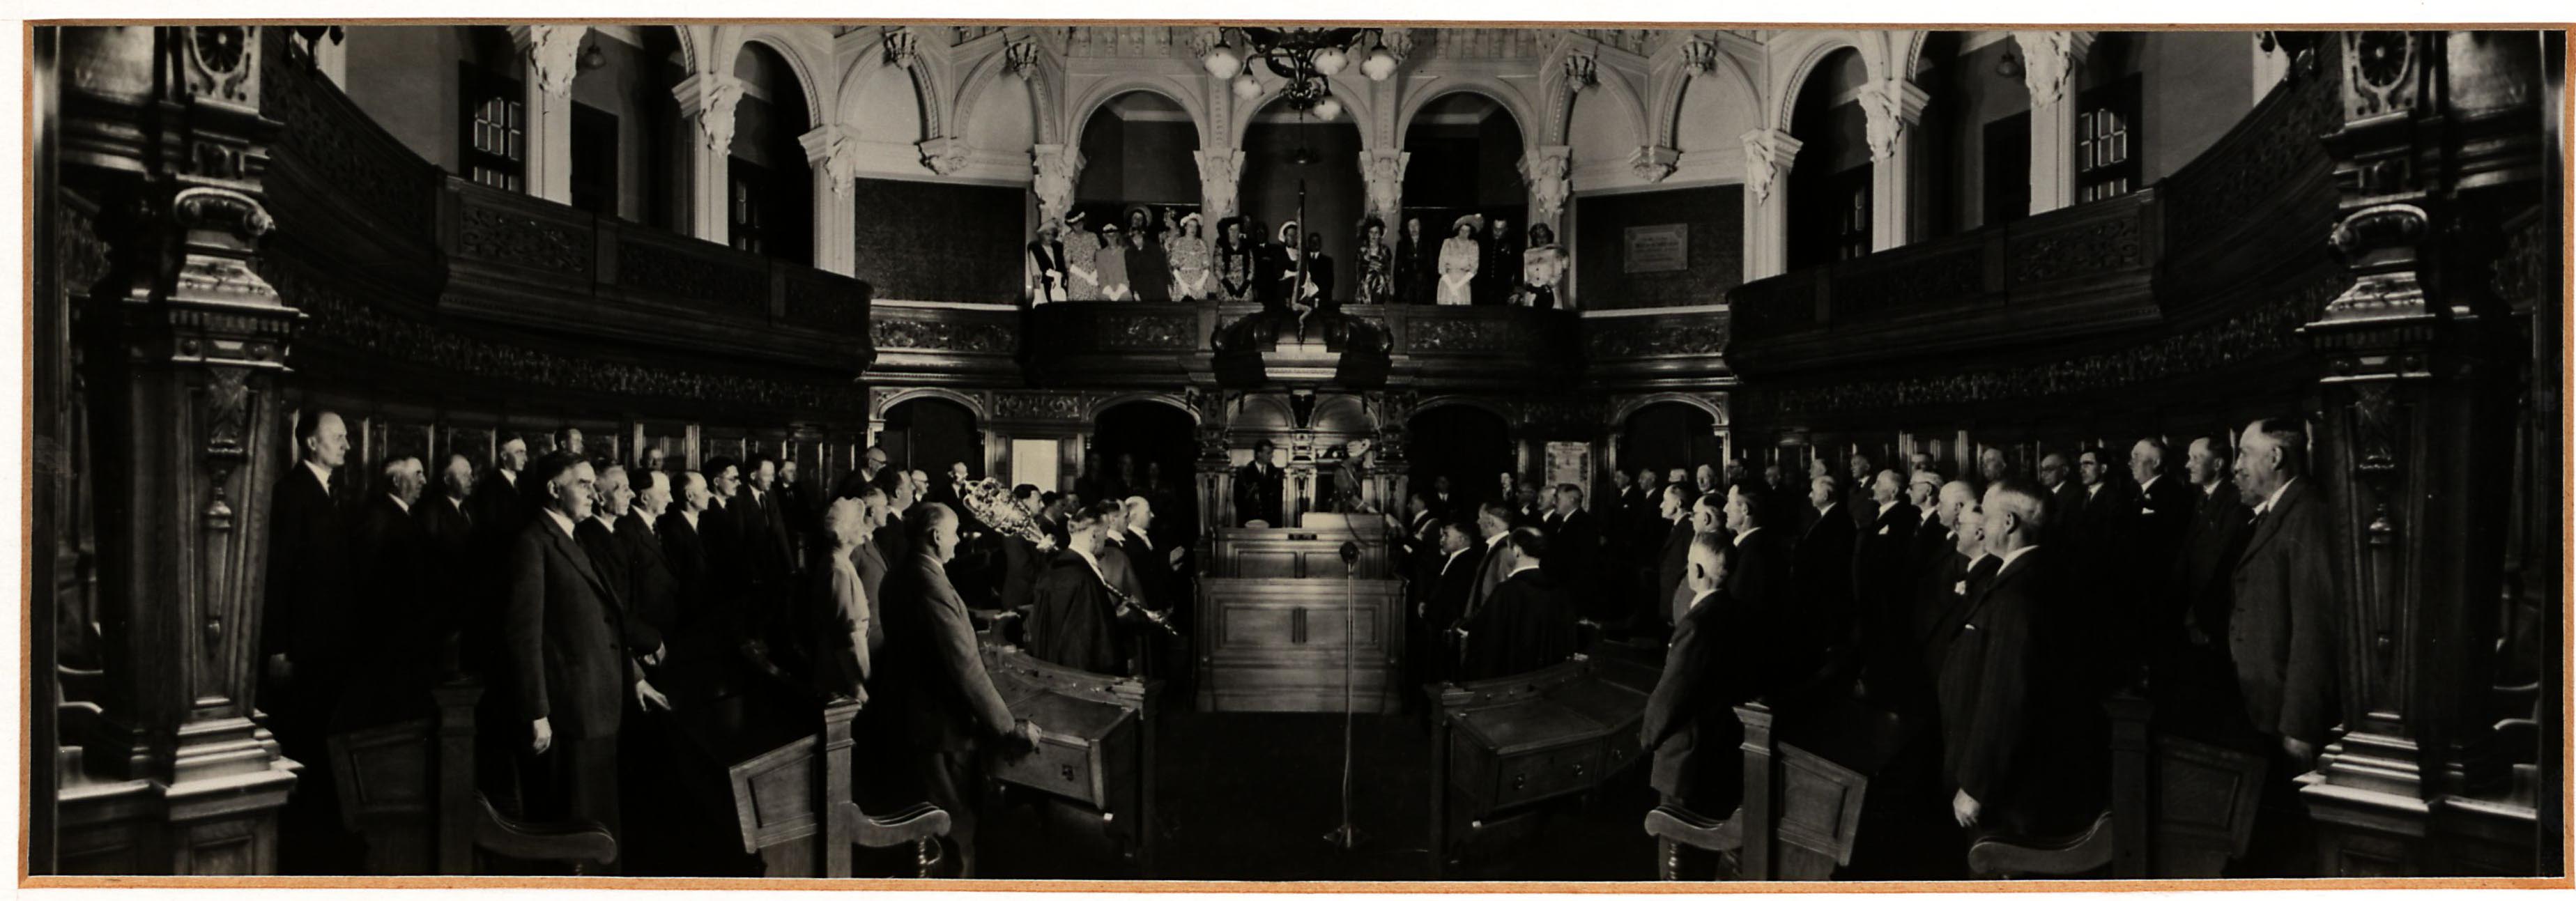 Photograph_of_Queen_and_DoE_in_the_States_Chamber_undated.jpg